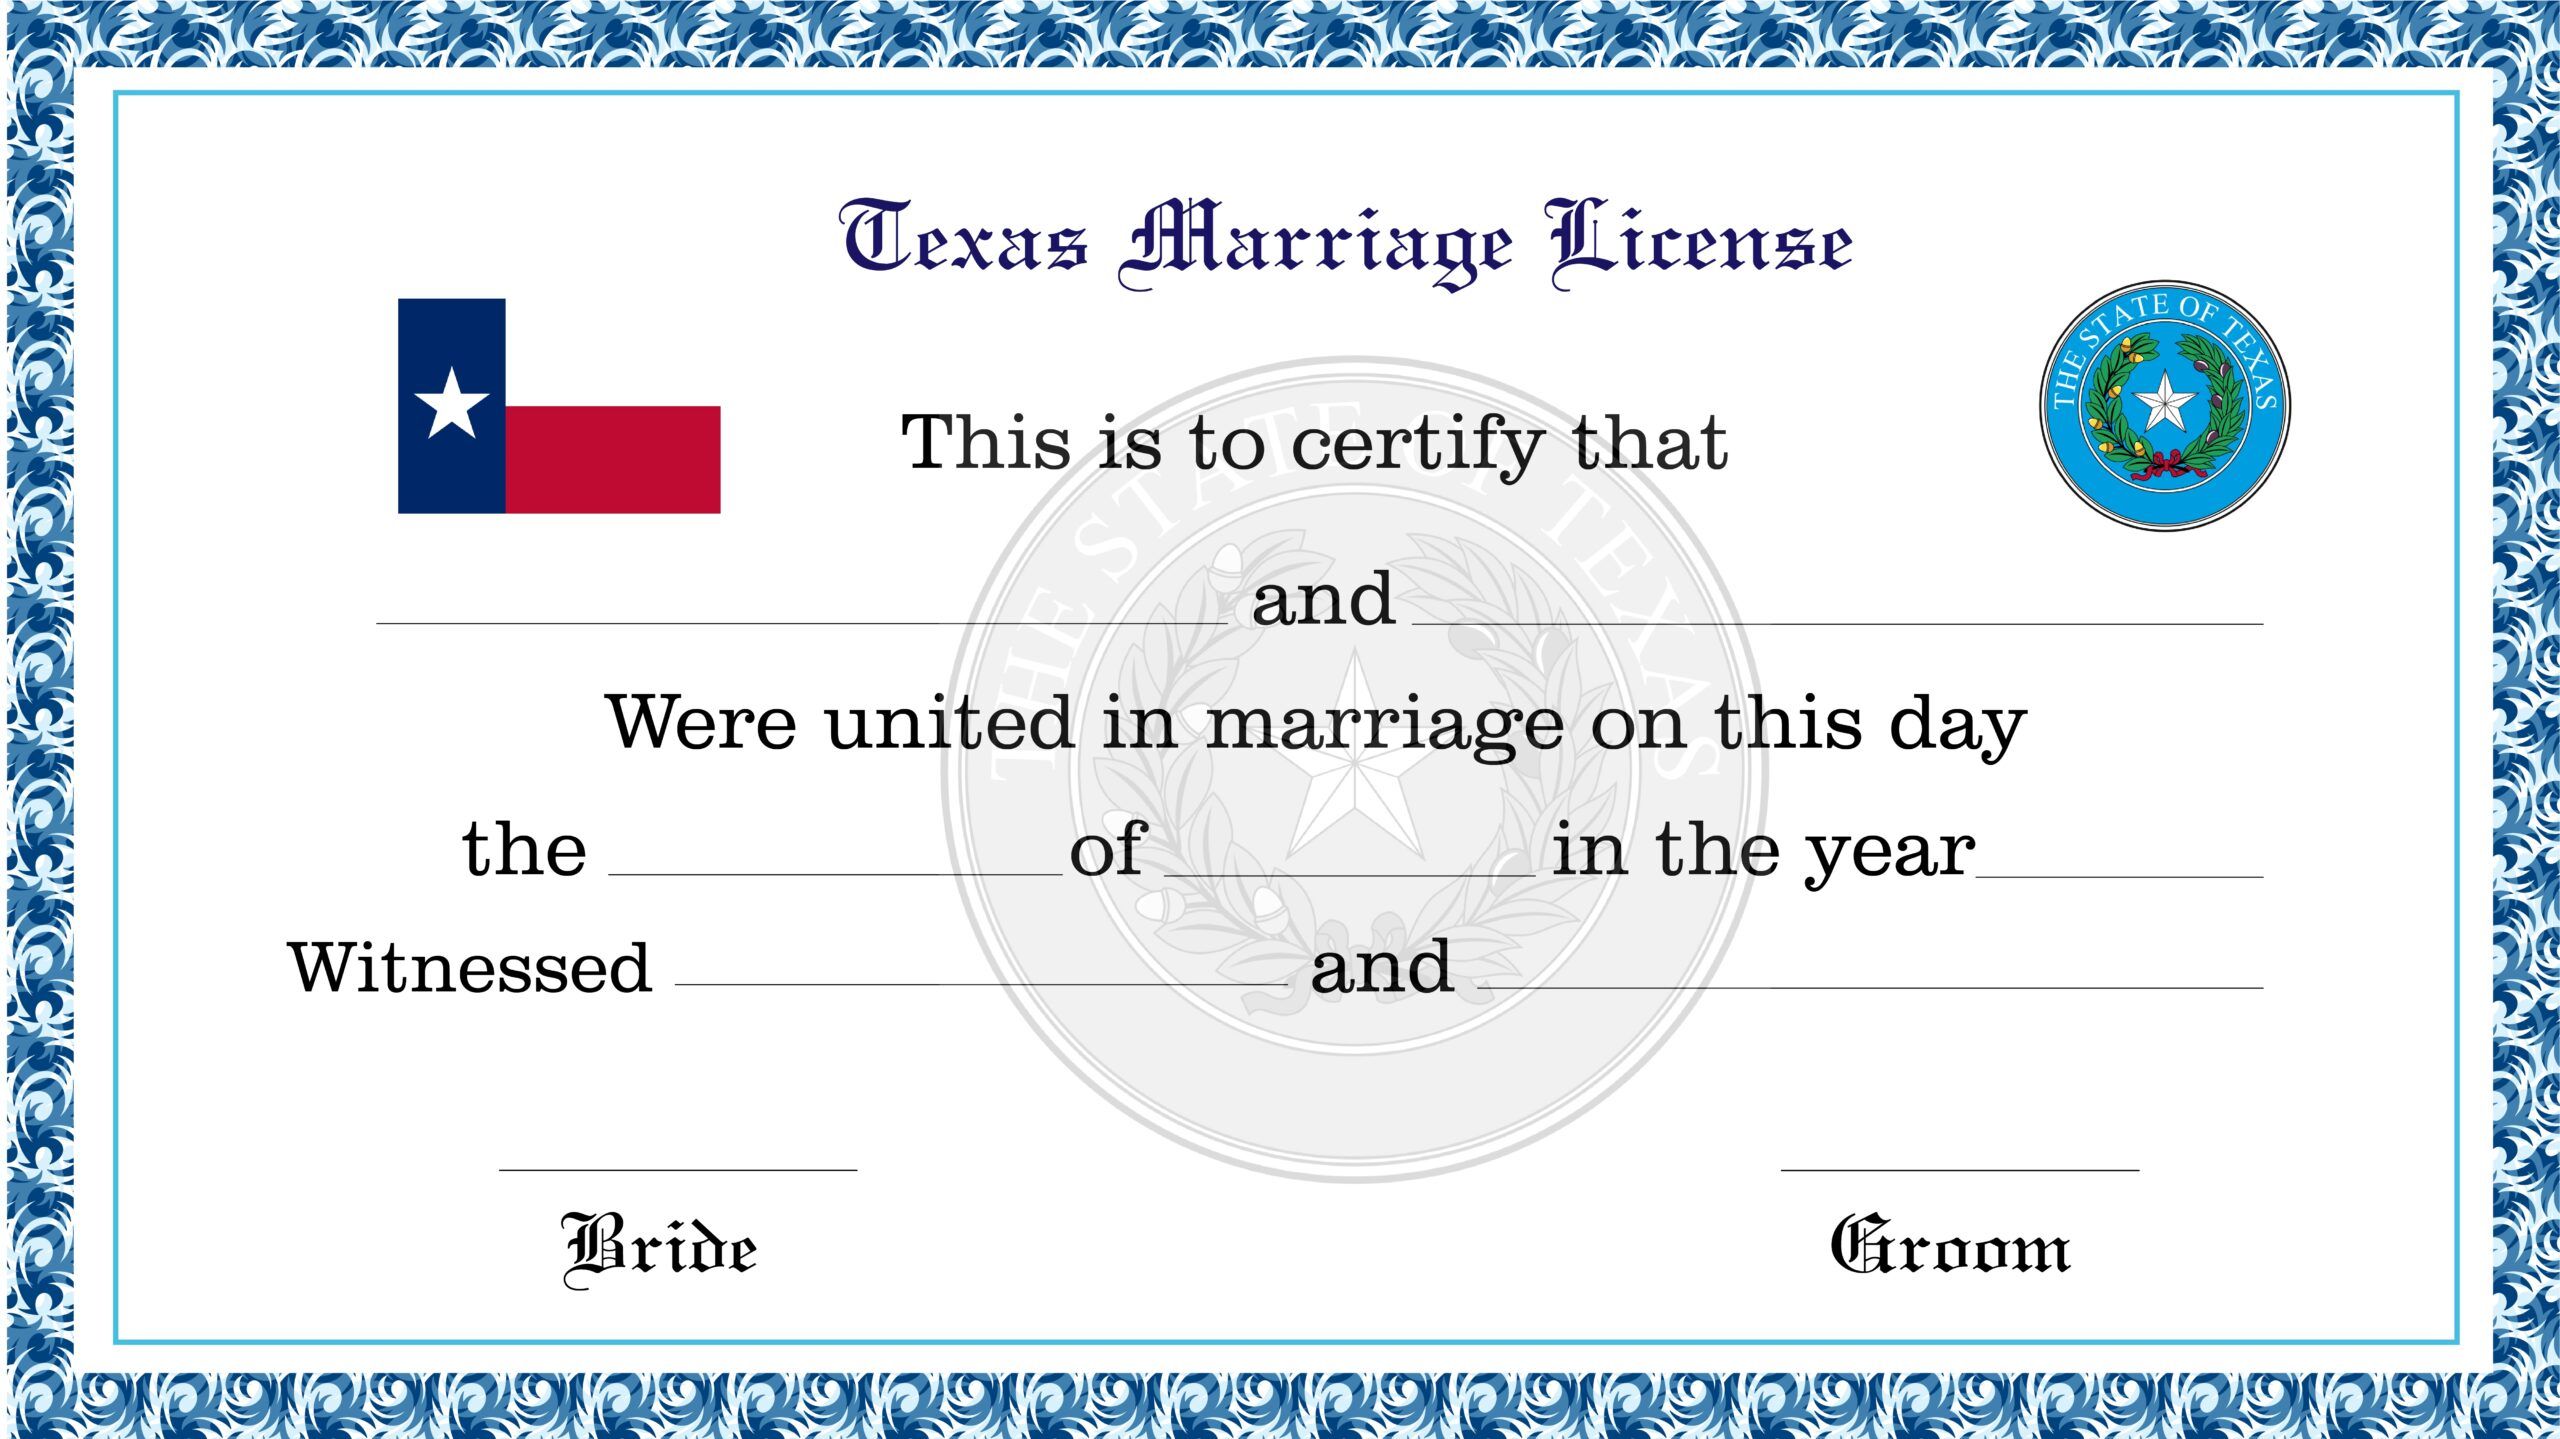 Name Change After Marriage - Marriage in Texas - Guides at Texas